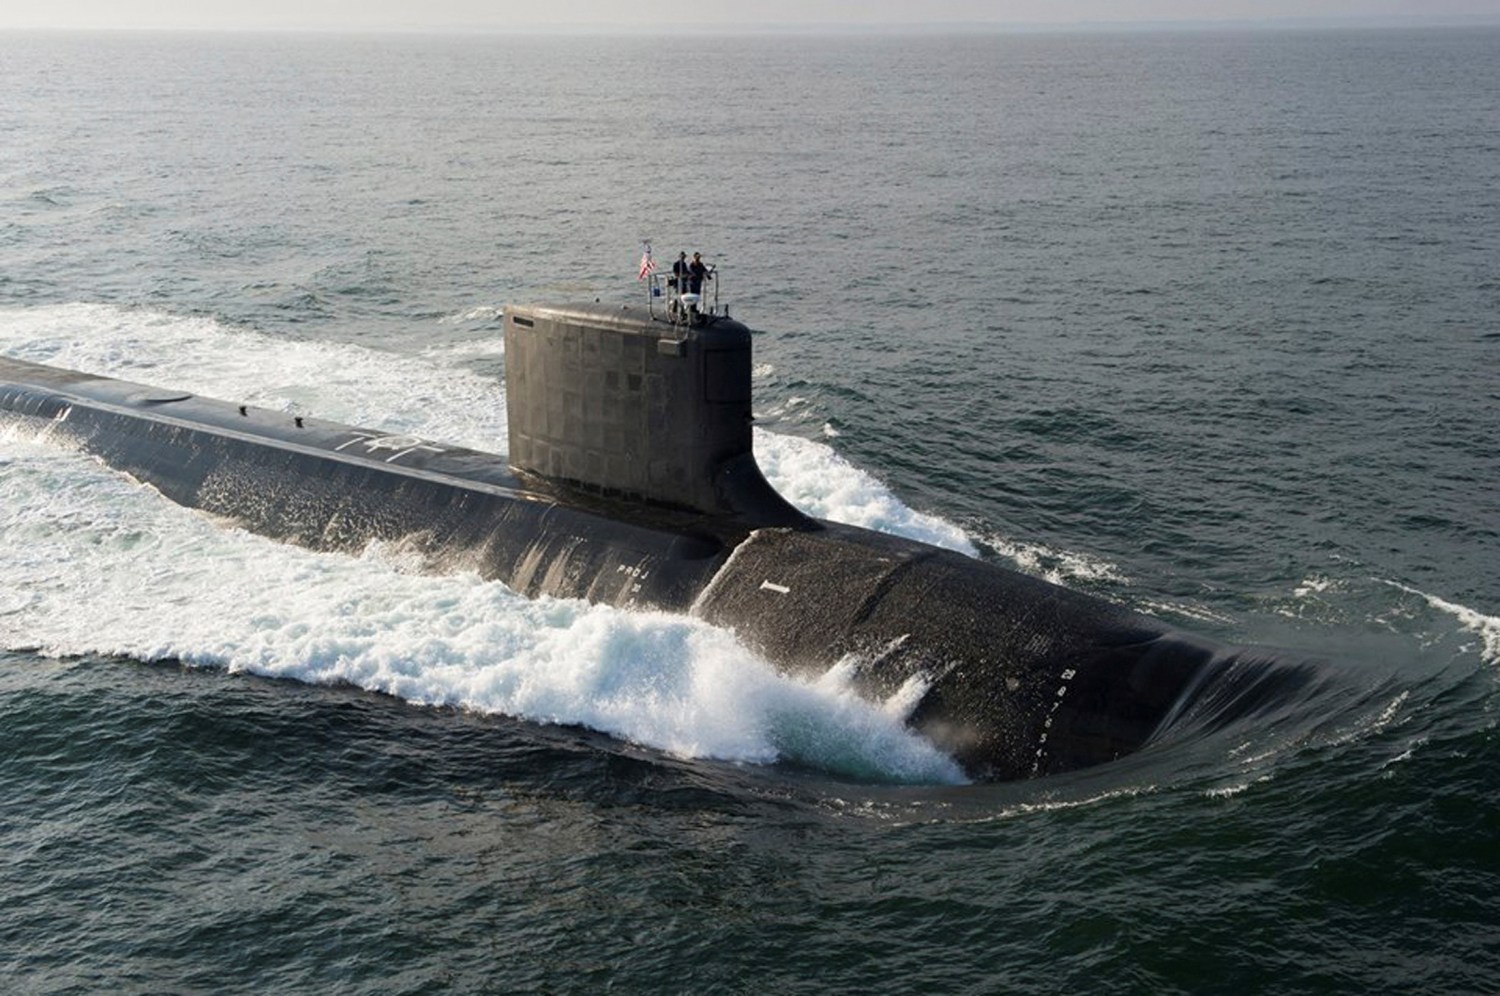 FILE PHOTO: The Virginia-class USS North Dakota (SSN 784) submarine is seen during bravo sea trials in this U.S. Navy handout picture taken in the Atlantic Ocean August 18, 2013. The Navy commissioned its newest attack submarine North Dakota, during a ceremony October 25, 2014, at Submarine Base New London in Groton, Connecticut, defense officials announced. REUTERS/U.S. Navy/Handout  (MID-SEA - Tags: MILITARY) THIS IMAGE HAS BEEN SUPPLIED BY A THIRD PARTY. IT IS DISTRIBUTED, EXACTLY AS RECEIVED BY REUTERS, AS A SERVICE TO CLIENTS. FOR EDITORIAL USE ONLY. NOT FOR SALE FOR MARKETING OR ADVERTISING CAMPAIGNS/File Photo